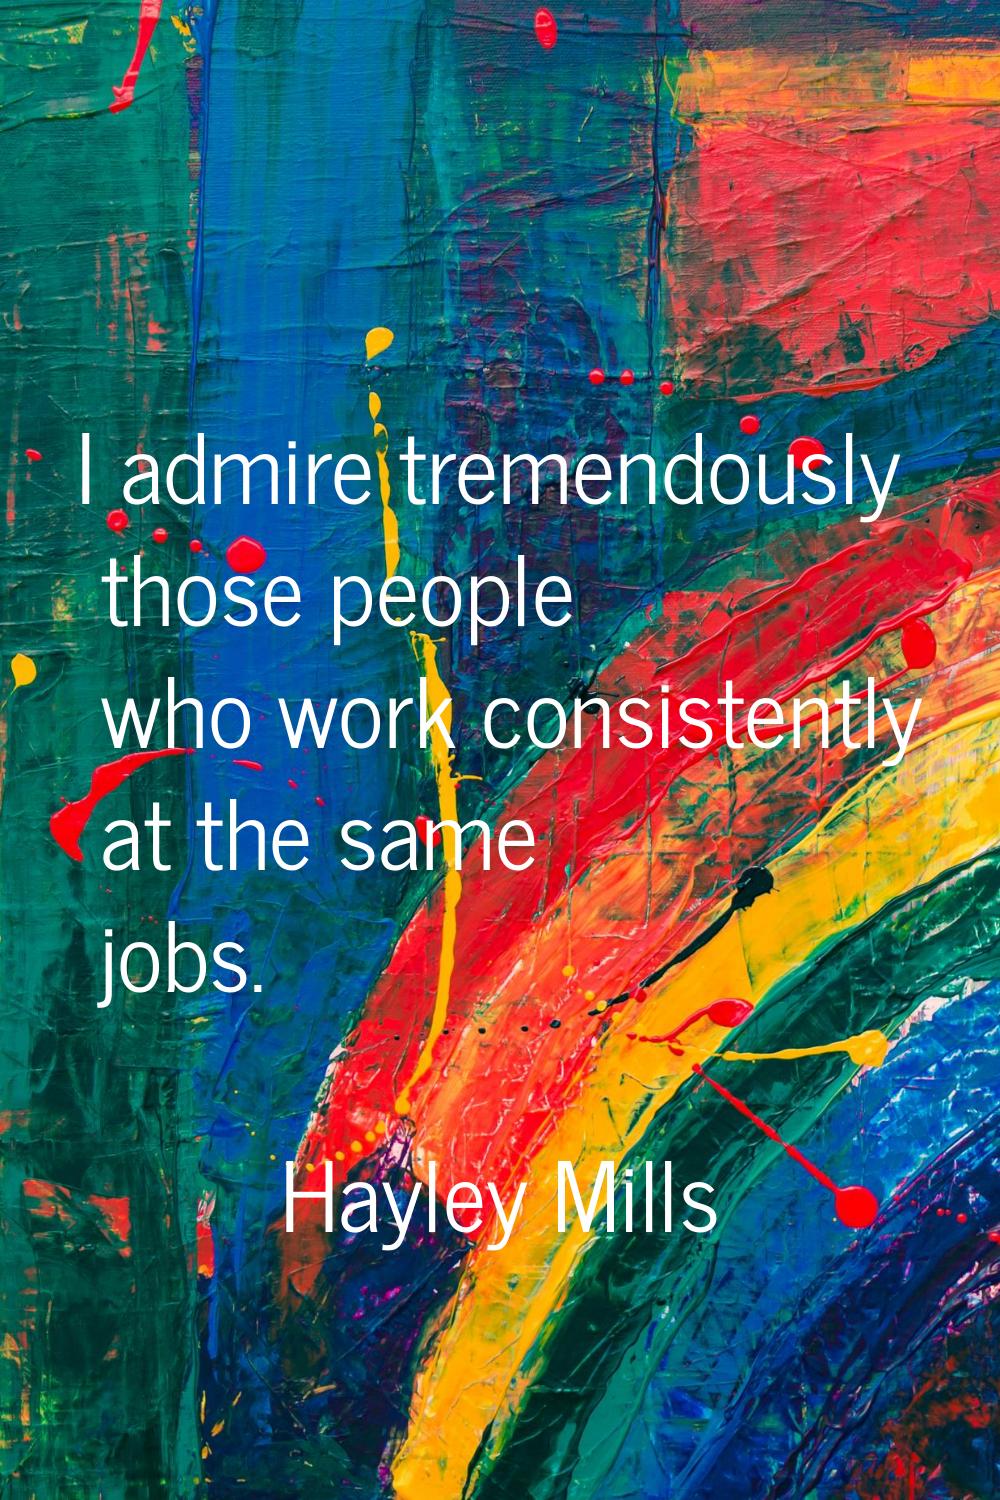 I admire tremendously those people who work consistently at the same jobs.